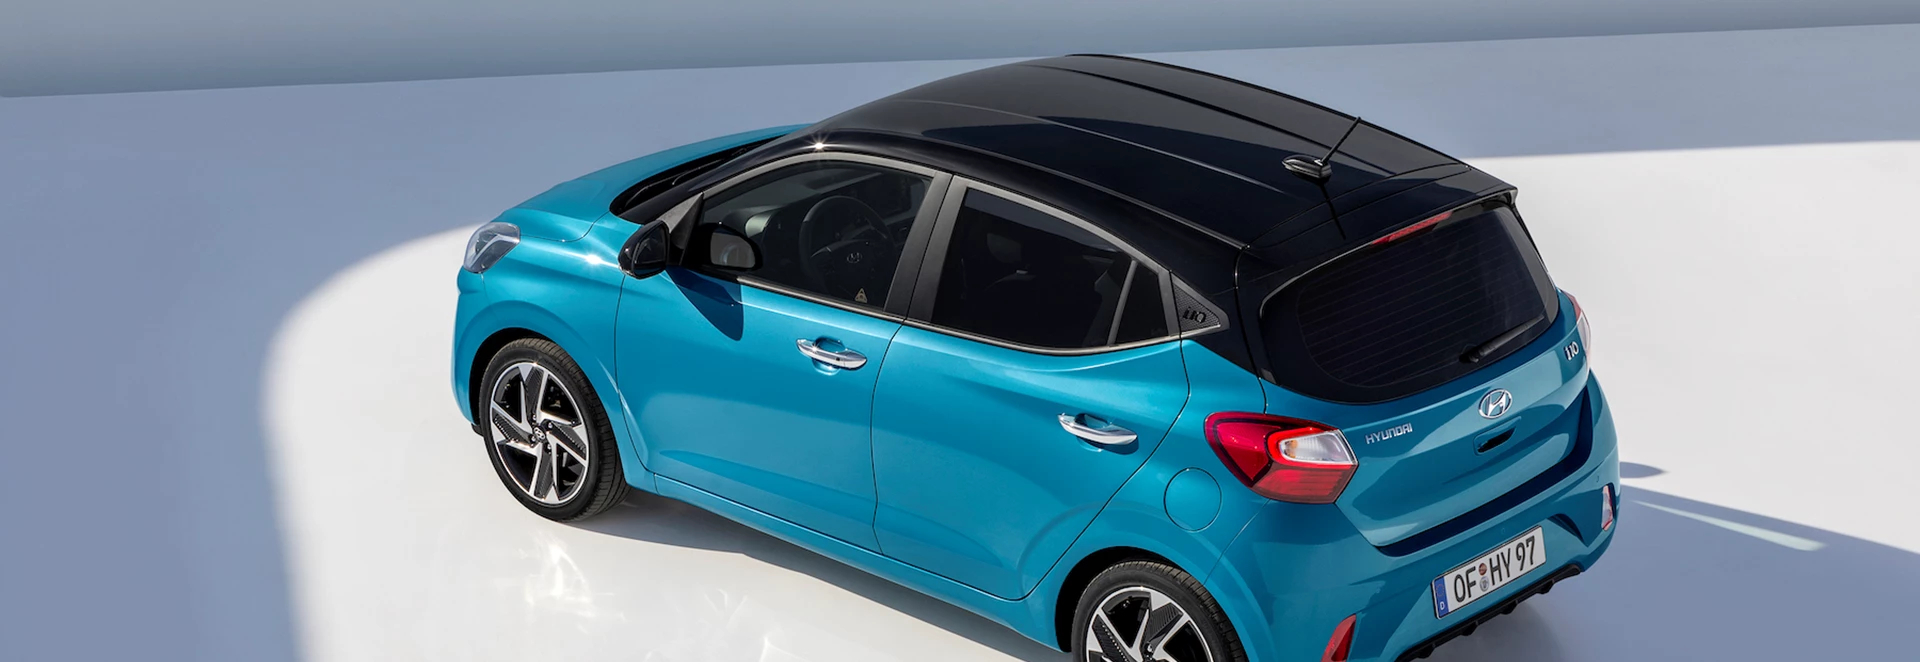 5 reasons why the all-new Hyundai i10 could be the city car of choice